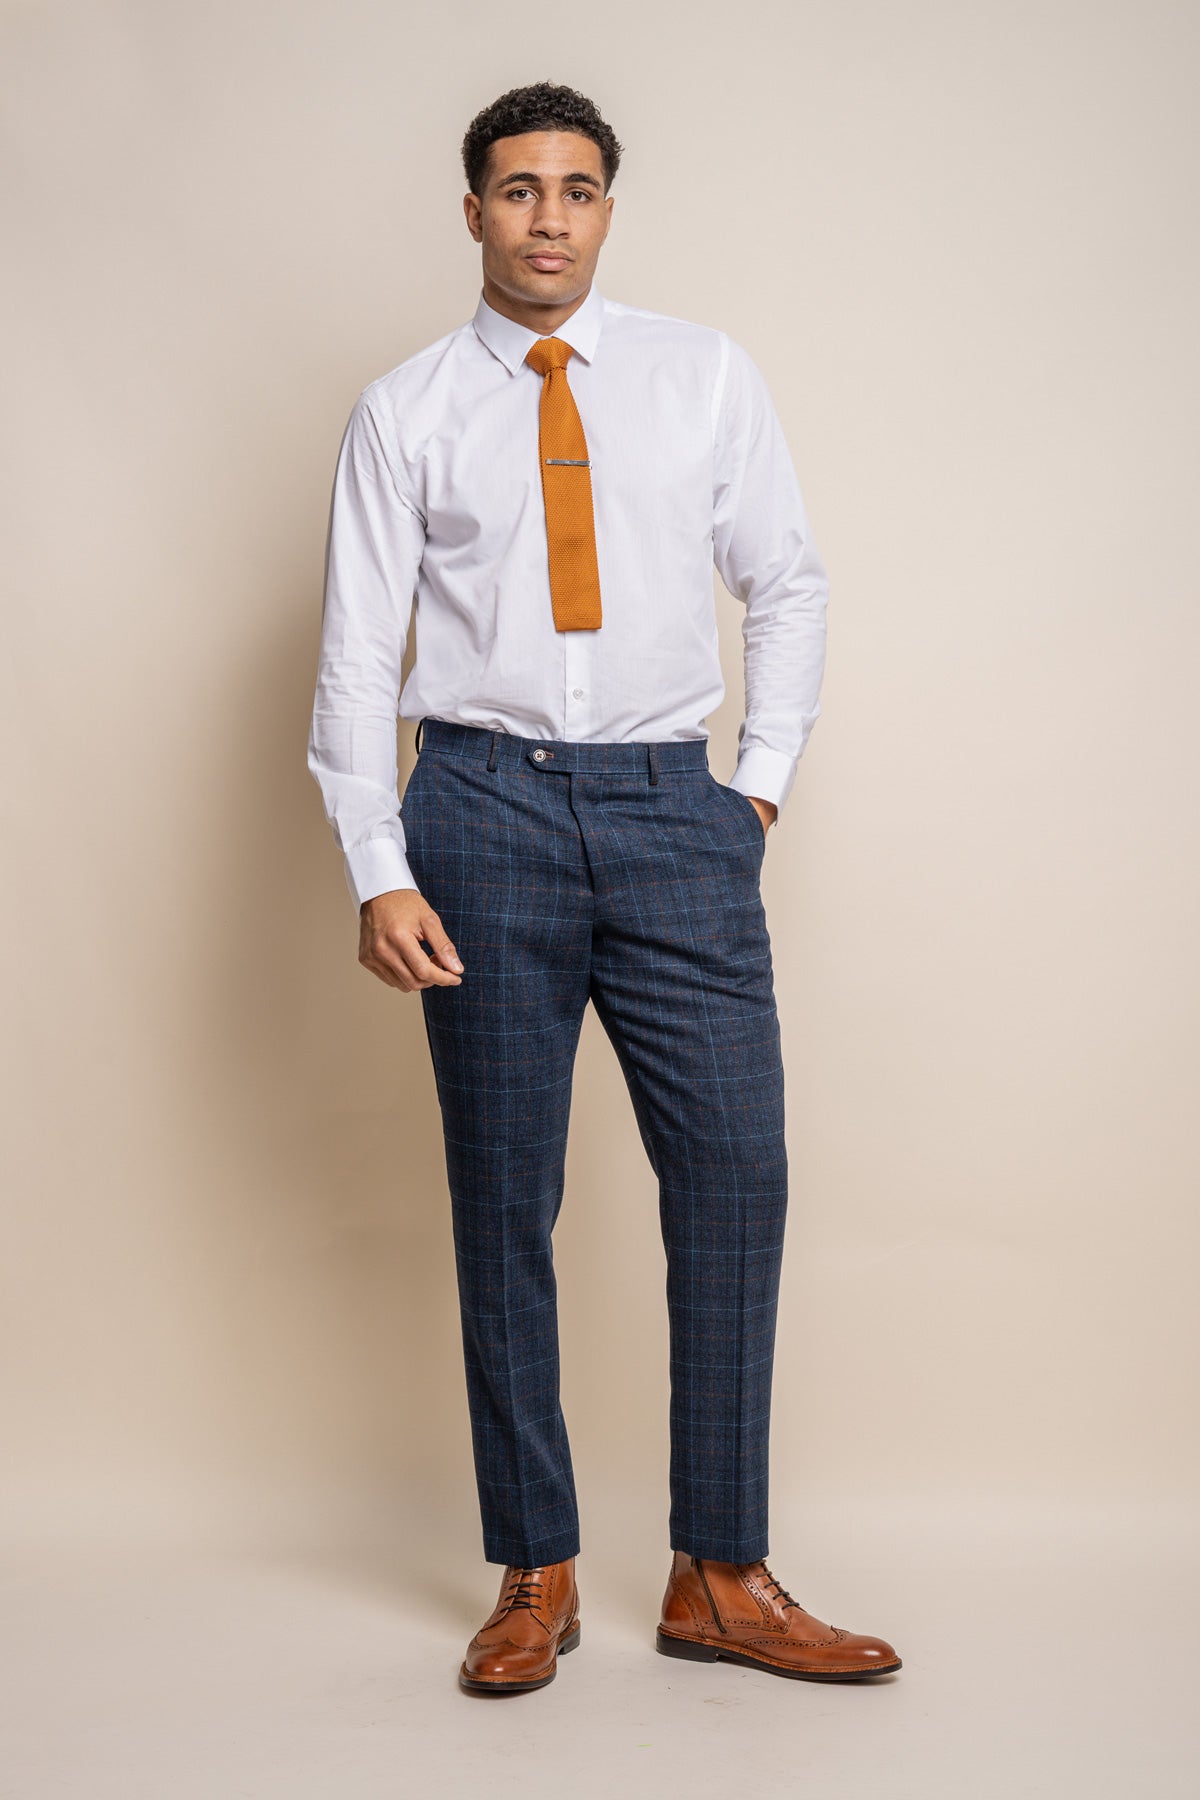 Cody Blue Check Trousers - Trousers - 28R - Swagger & Swoon